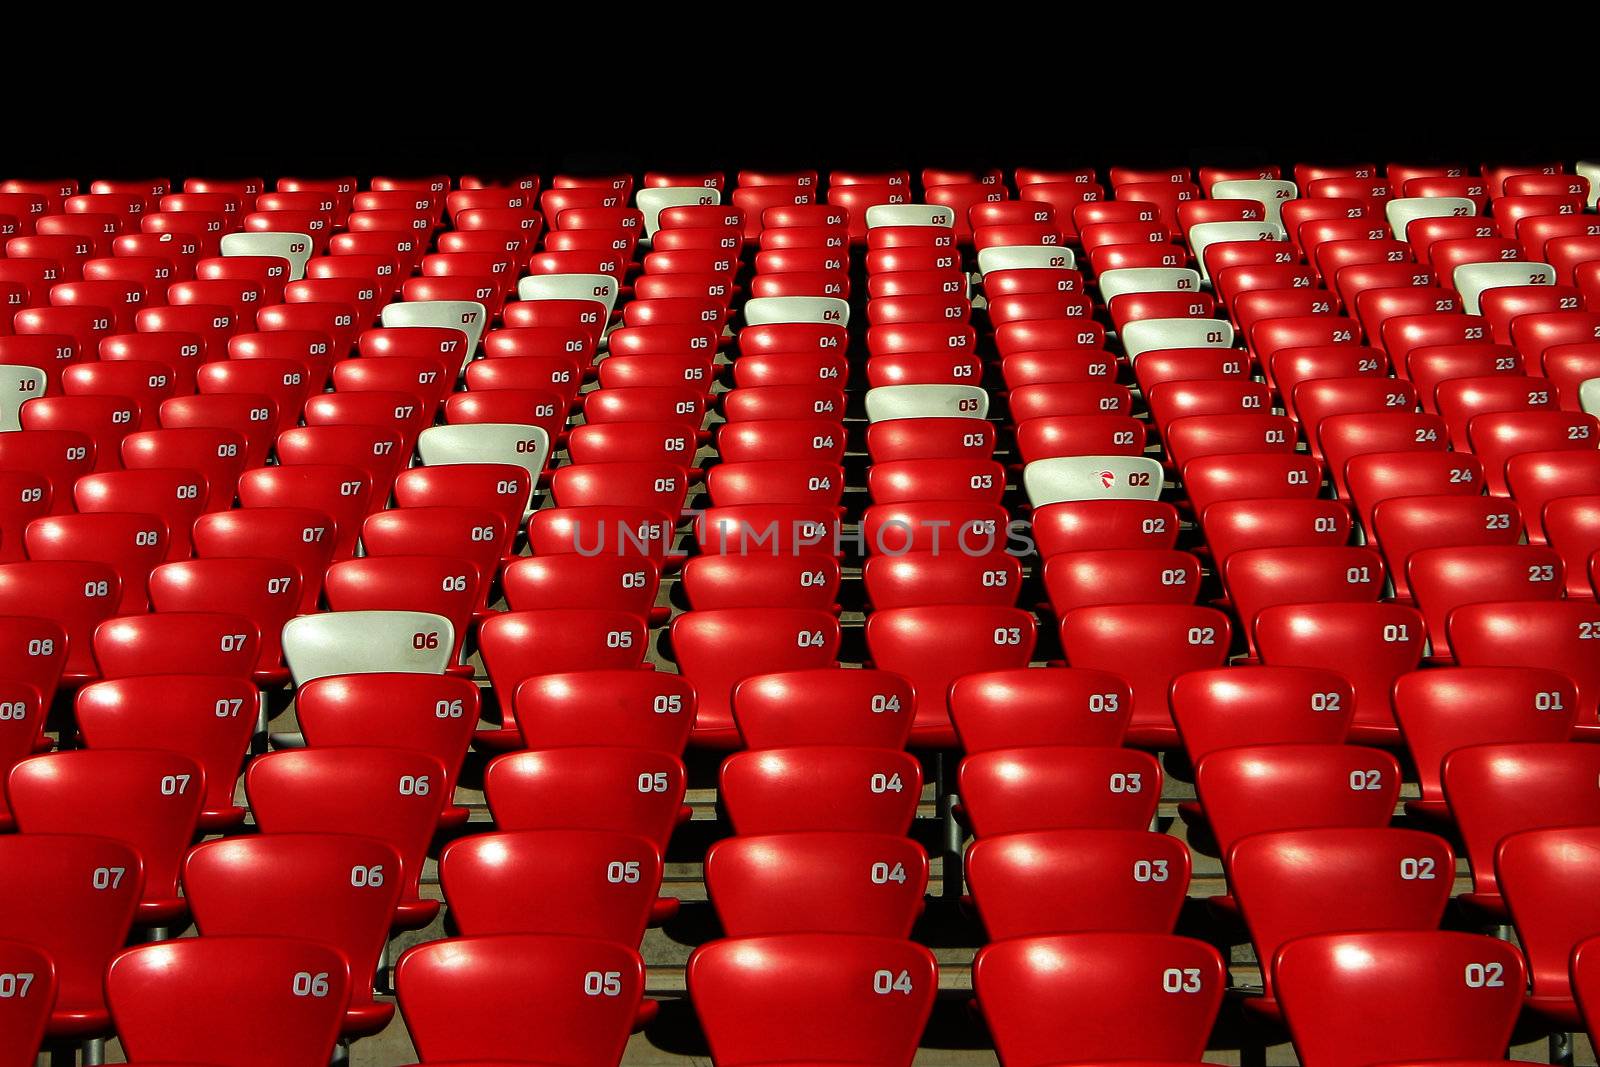 Overview of Red Tribune Seats in an Olympic Stadium